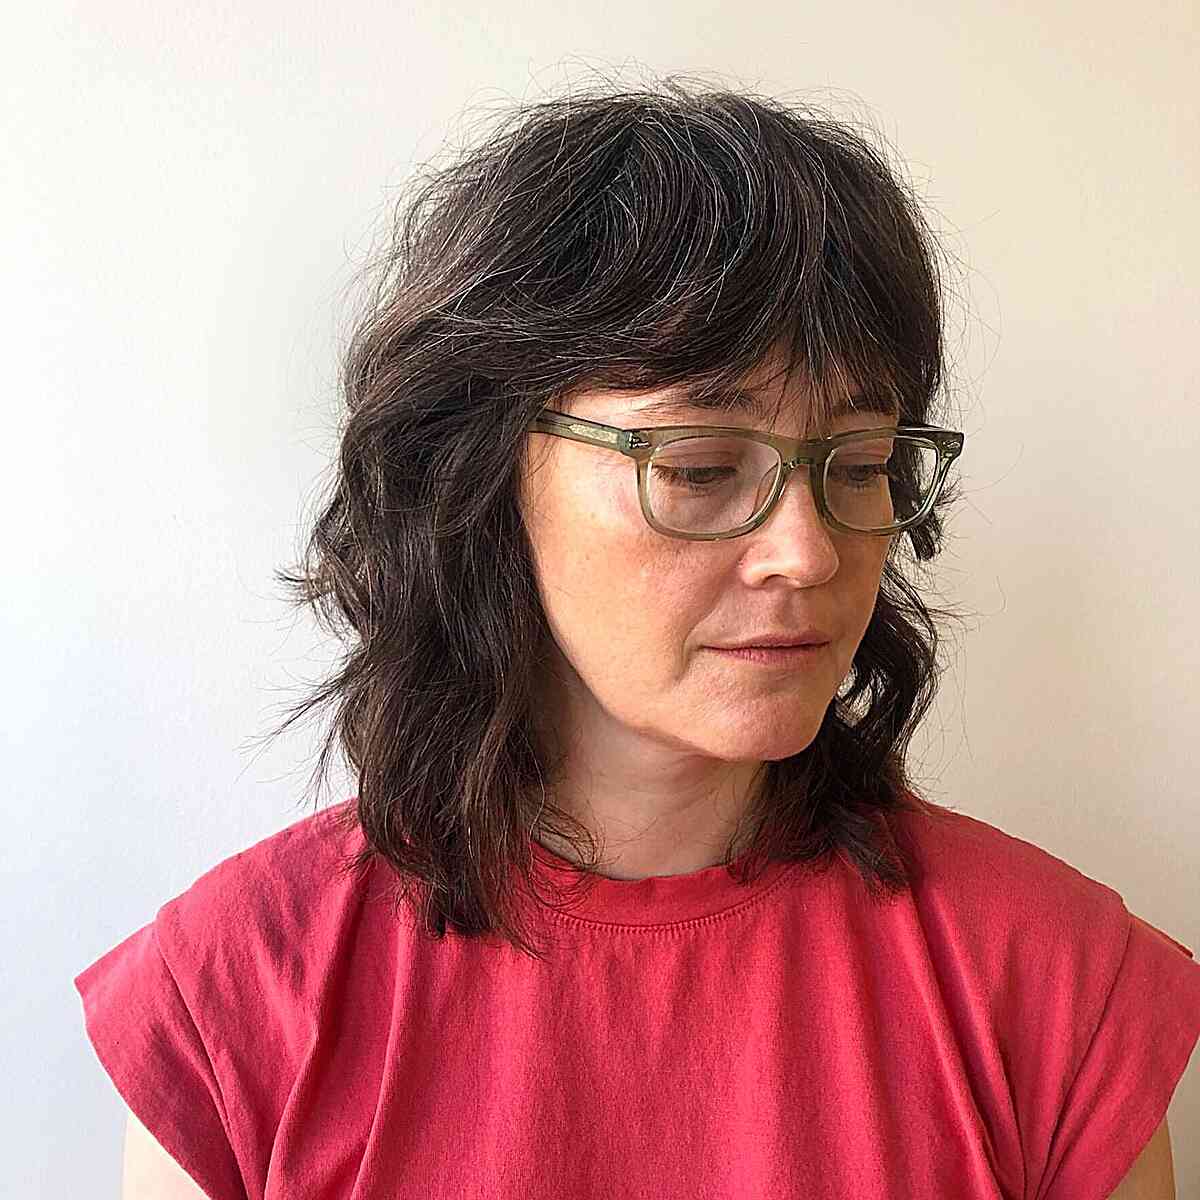 Shoulder-Length Shag with Heavy Bangs on Ladies Aged 50 and Up